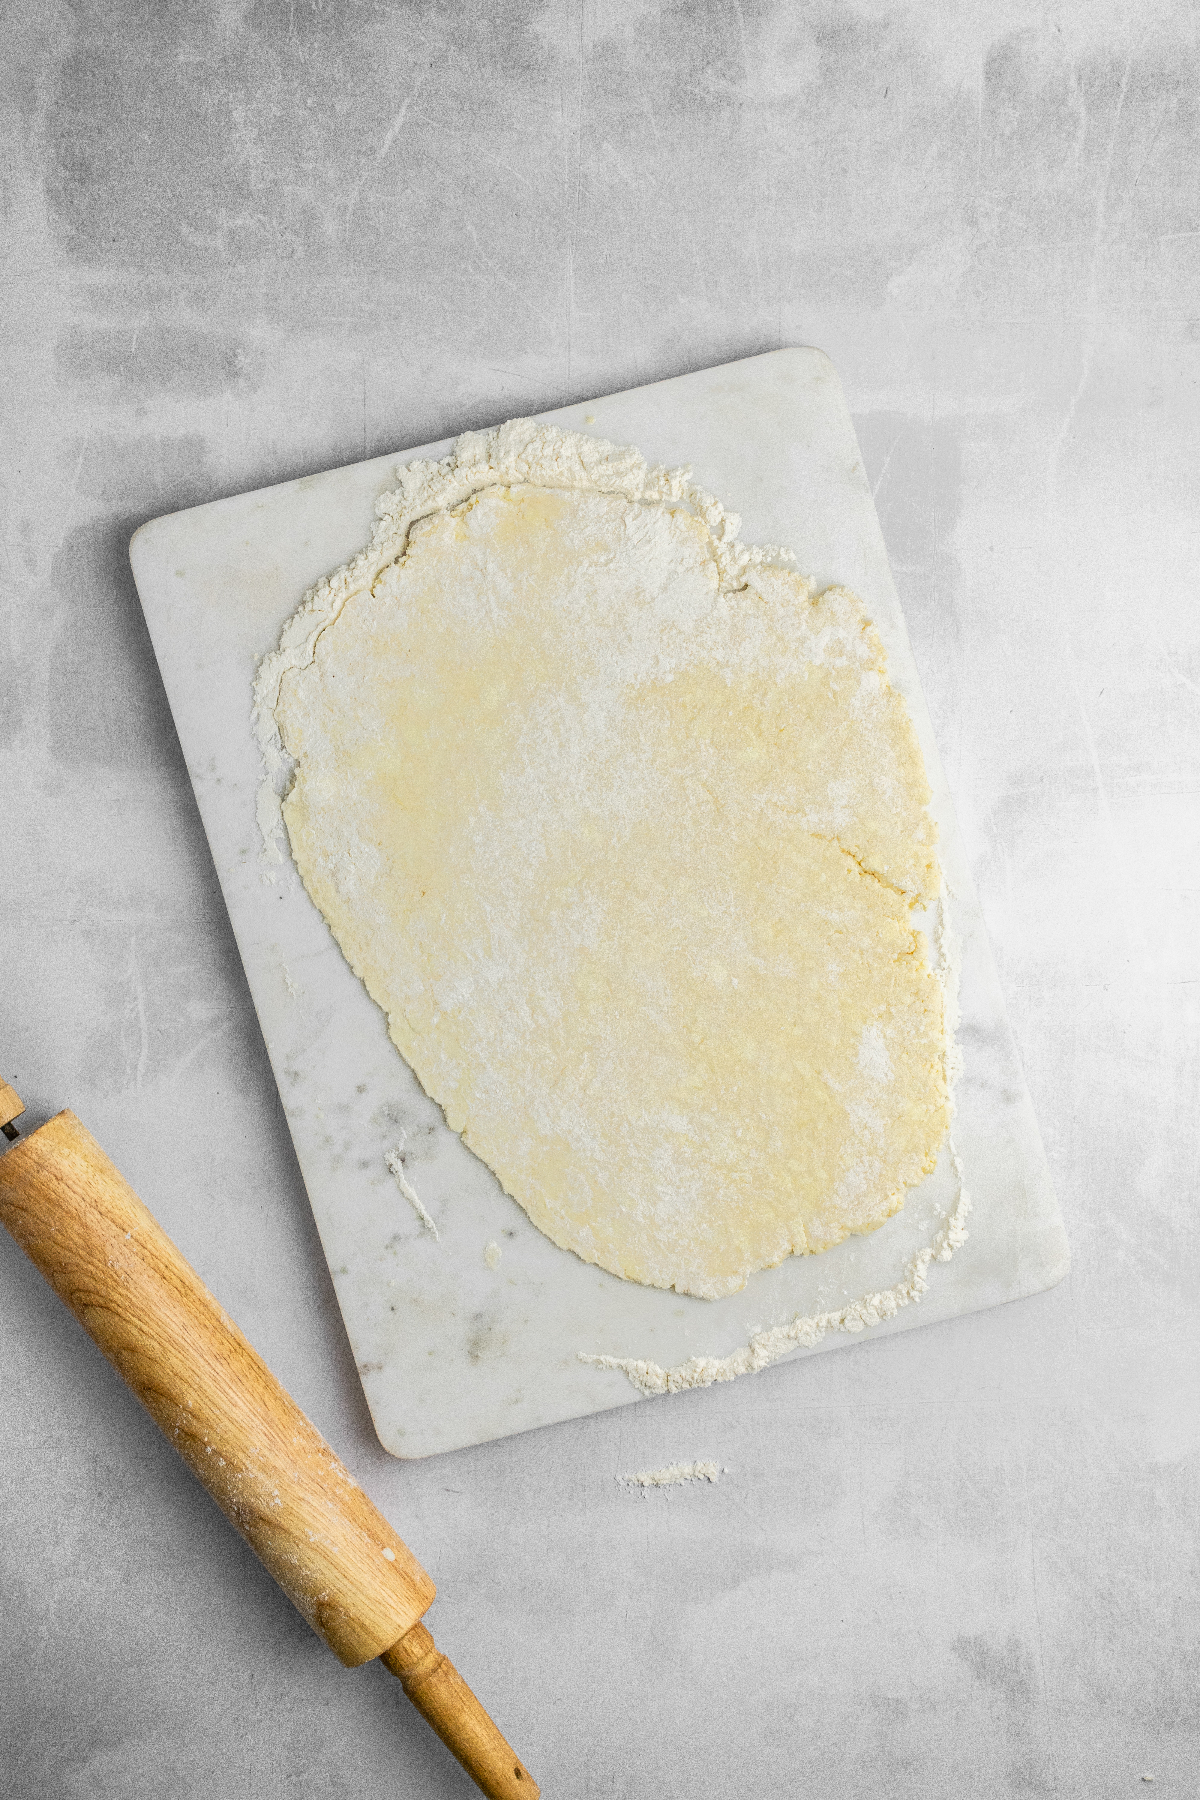 Pie crust rolled out with a rolling pin on a floured surface.